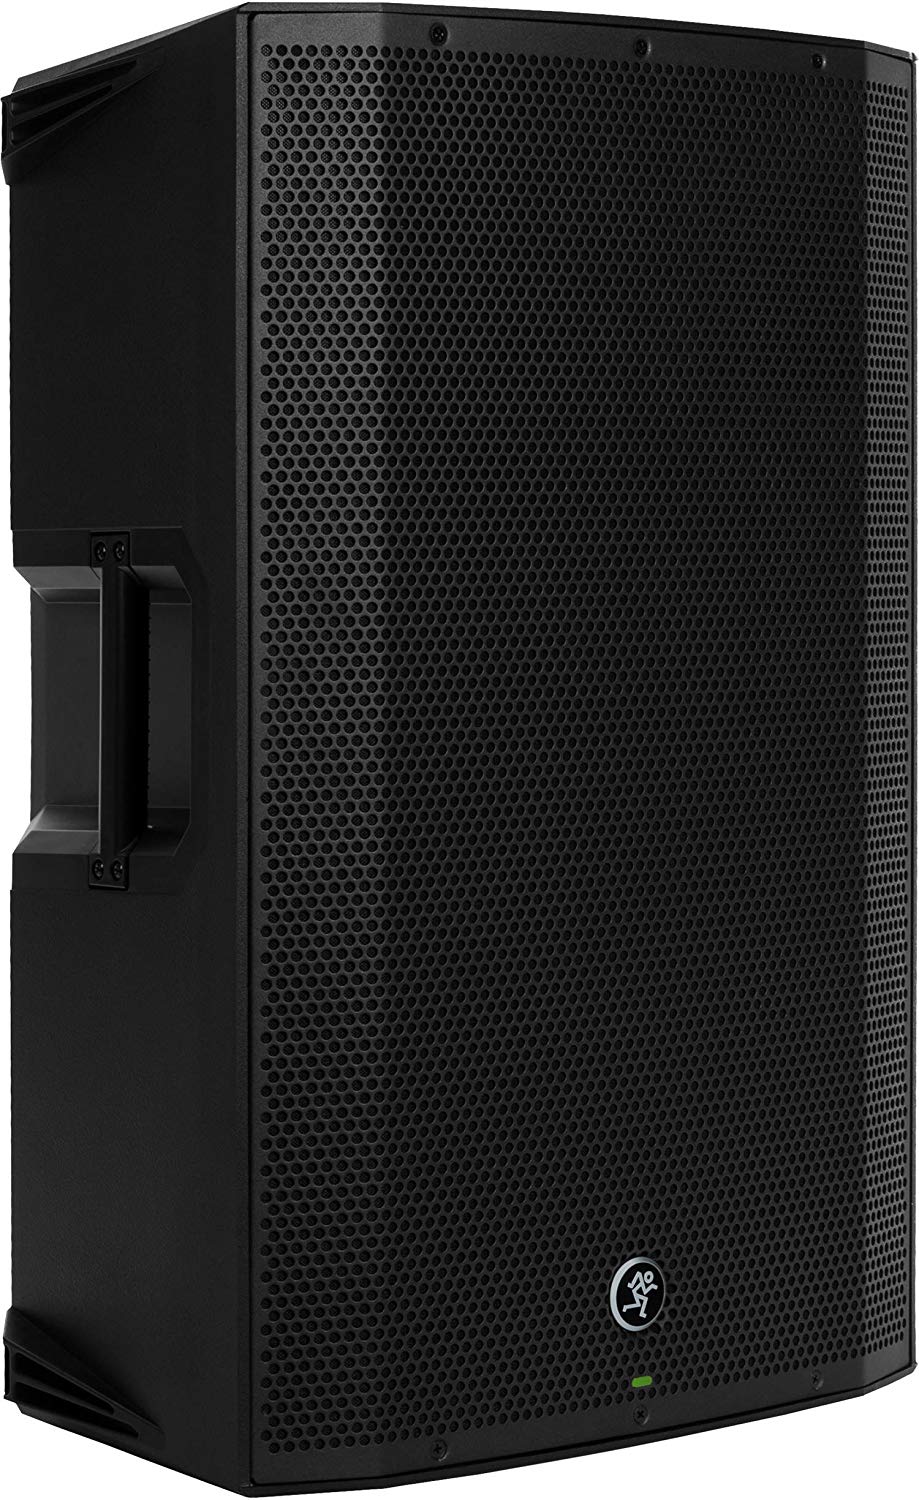 Discontinued: Mackie Thump15A 15 Inch Powered Loudspeaker